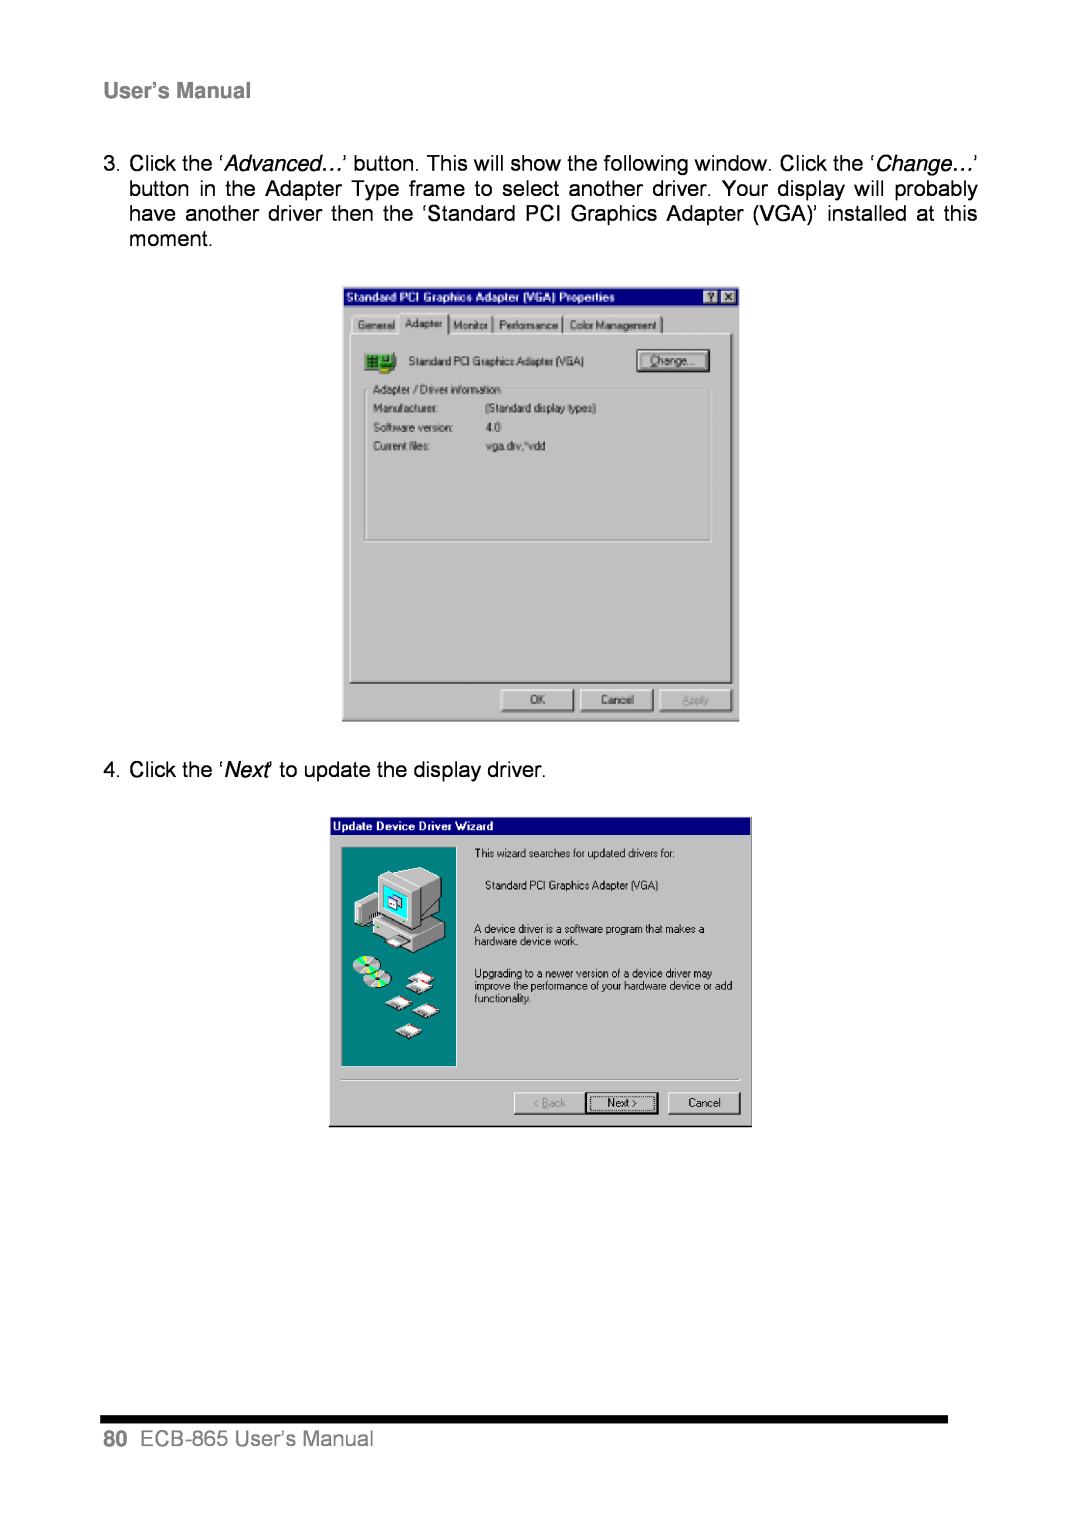 Intel user manual 80ECB-865User’s Manual, Click the ‘Next’ to update the display driver 